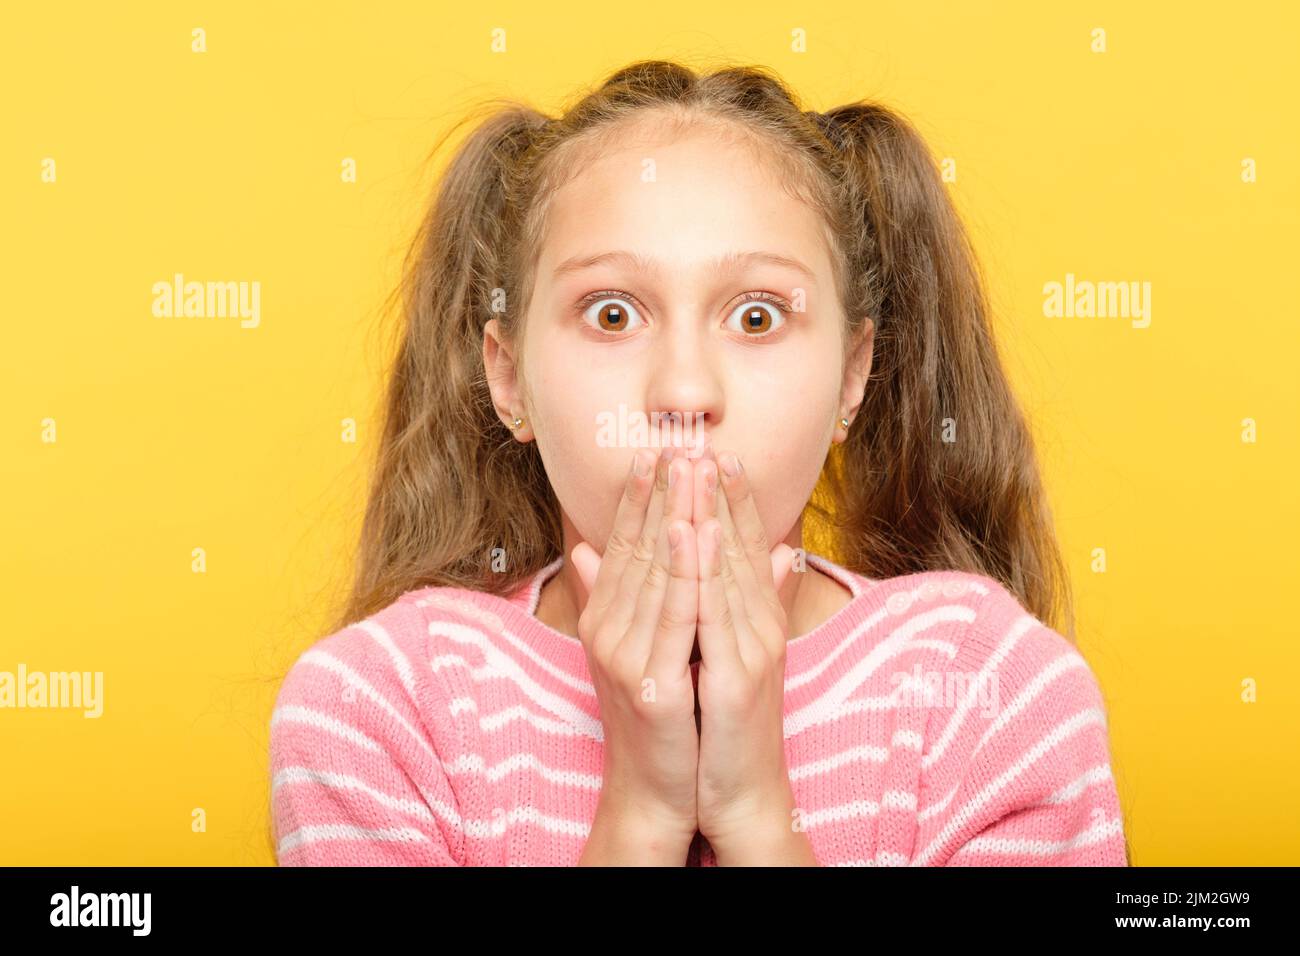 surprised astonished girl covering mouth reaction Stock Photo